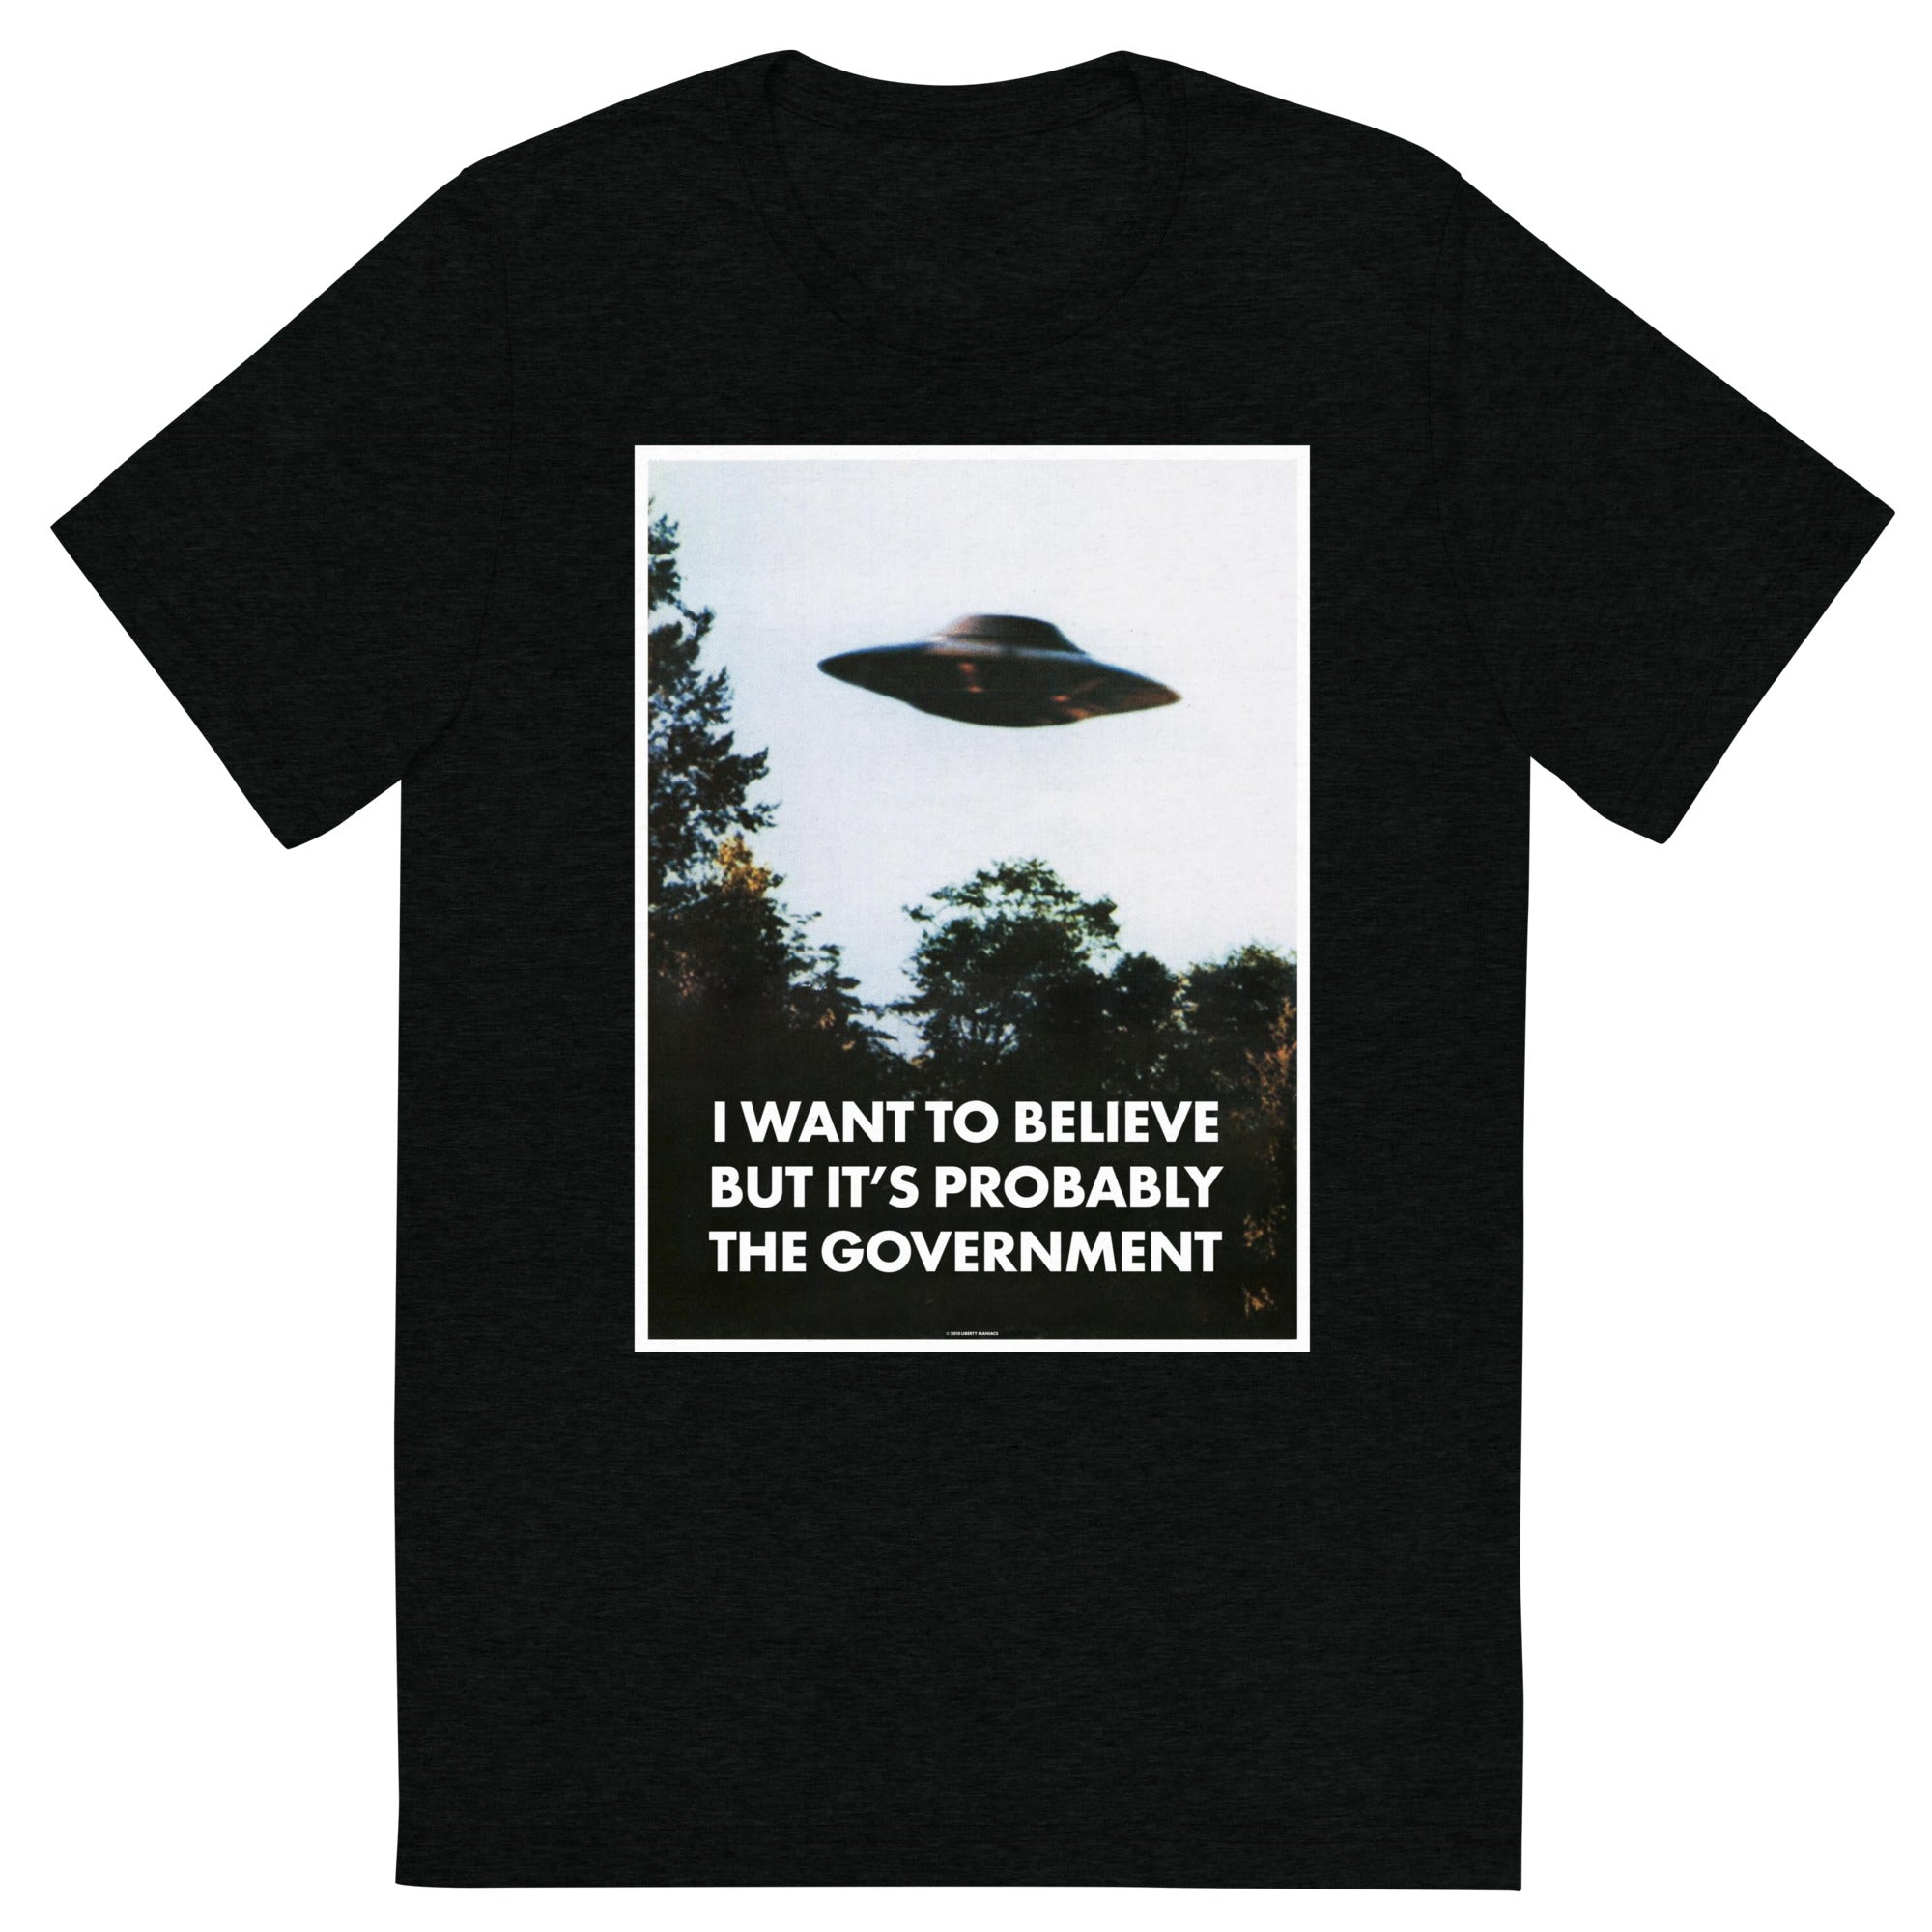 I Want To Believe But It's Probably the Government Tri-blend T-shirt